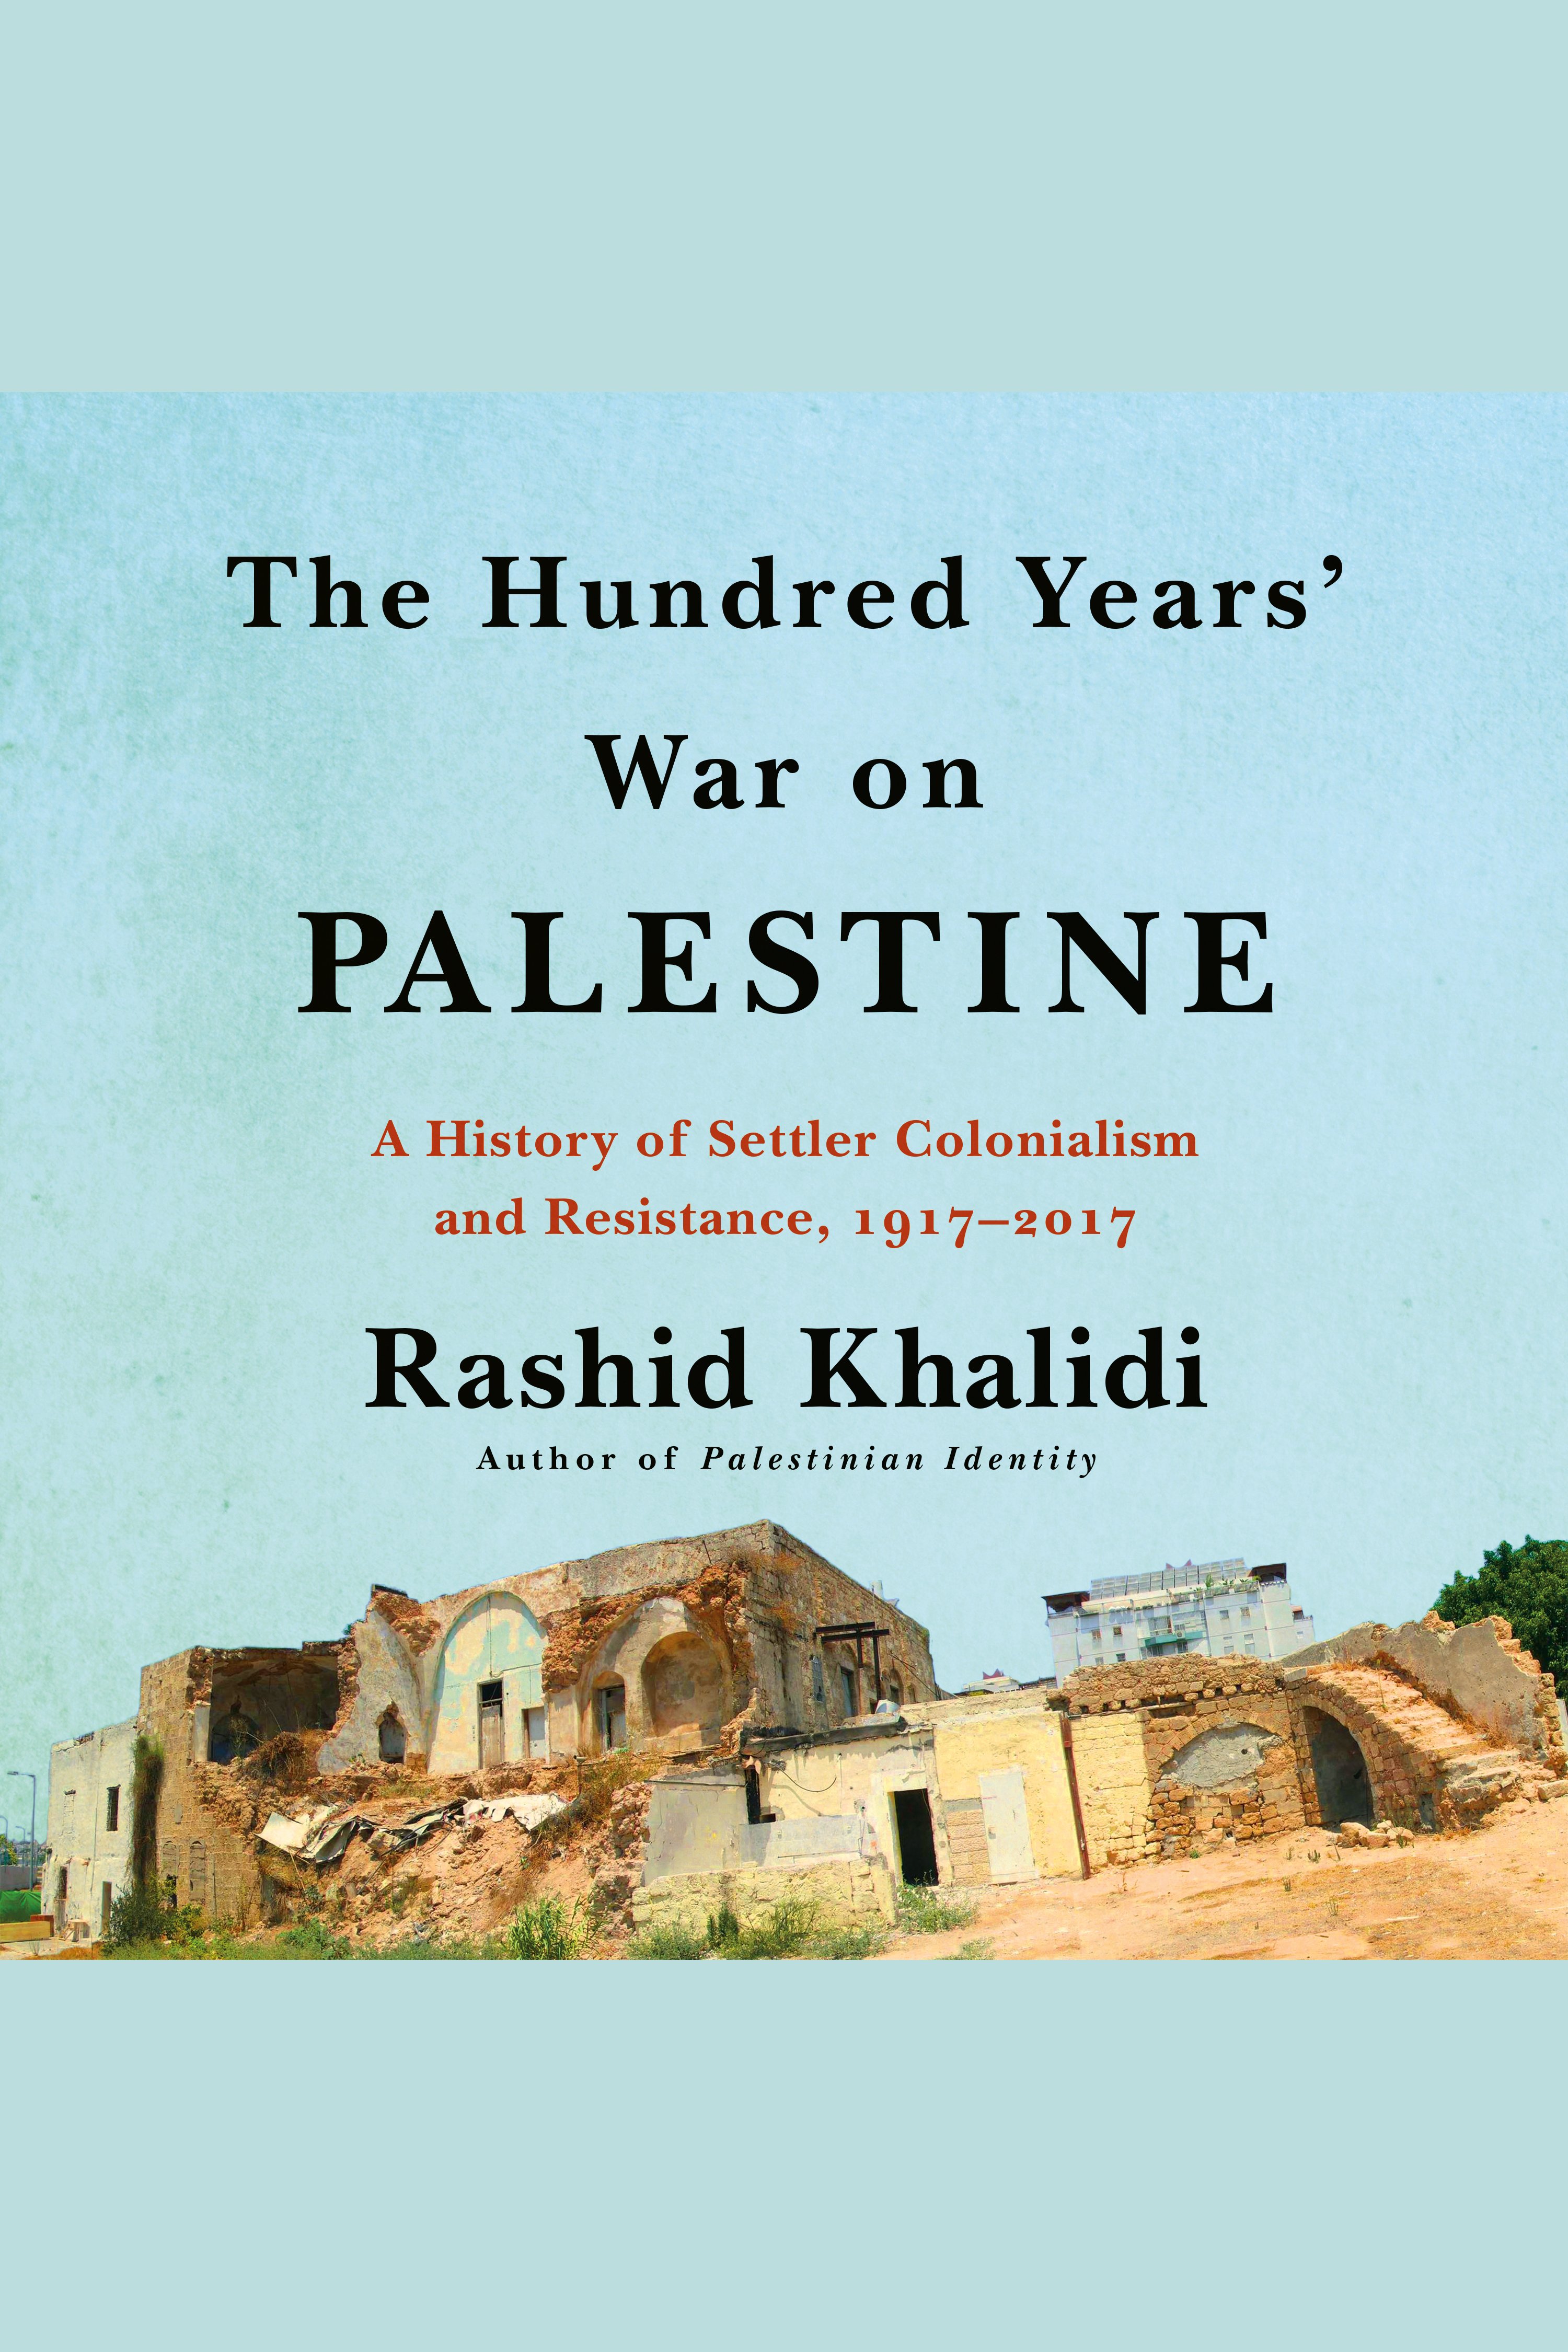 The hundred years'  war on Palestine a history of settler colonial conquest and resistance, 1917-2017 cover image